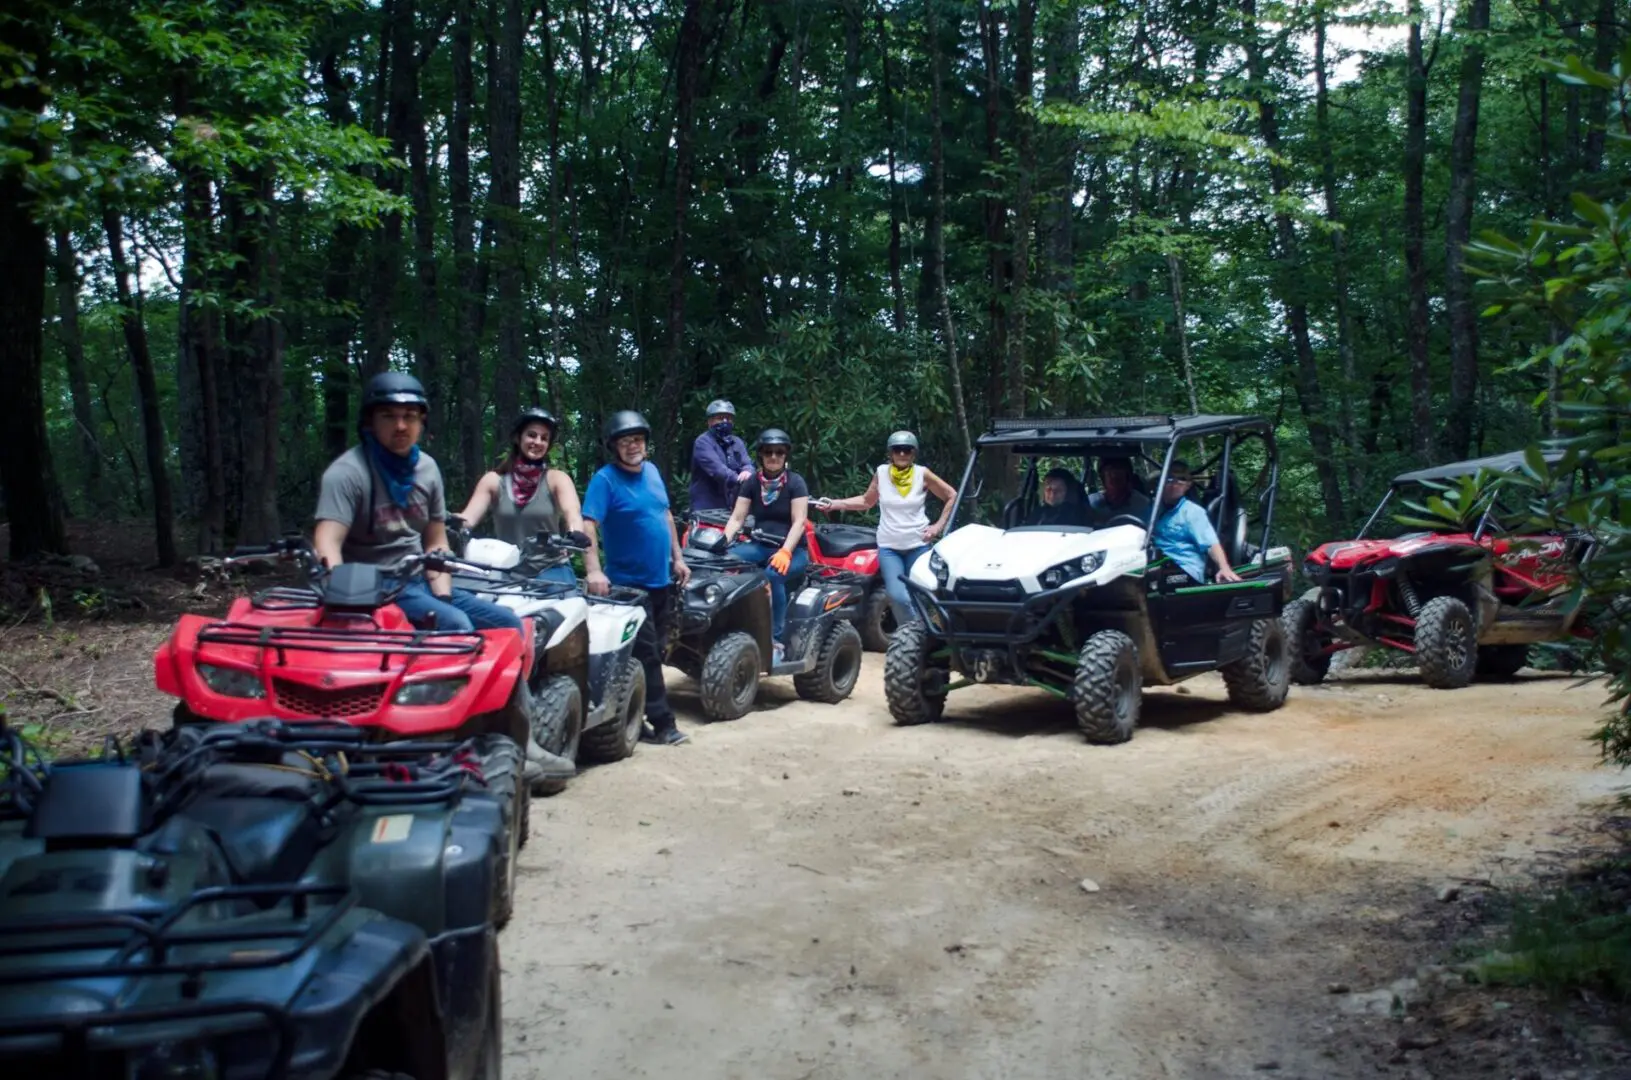 A group of people on atvs in the woods.